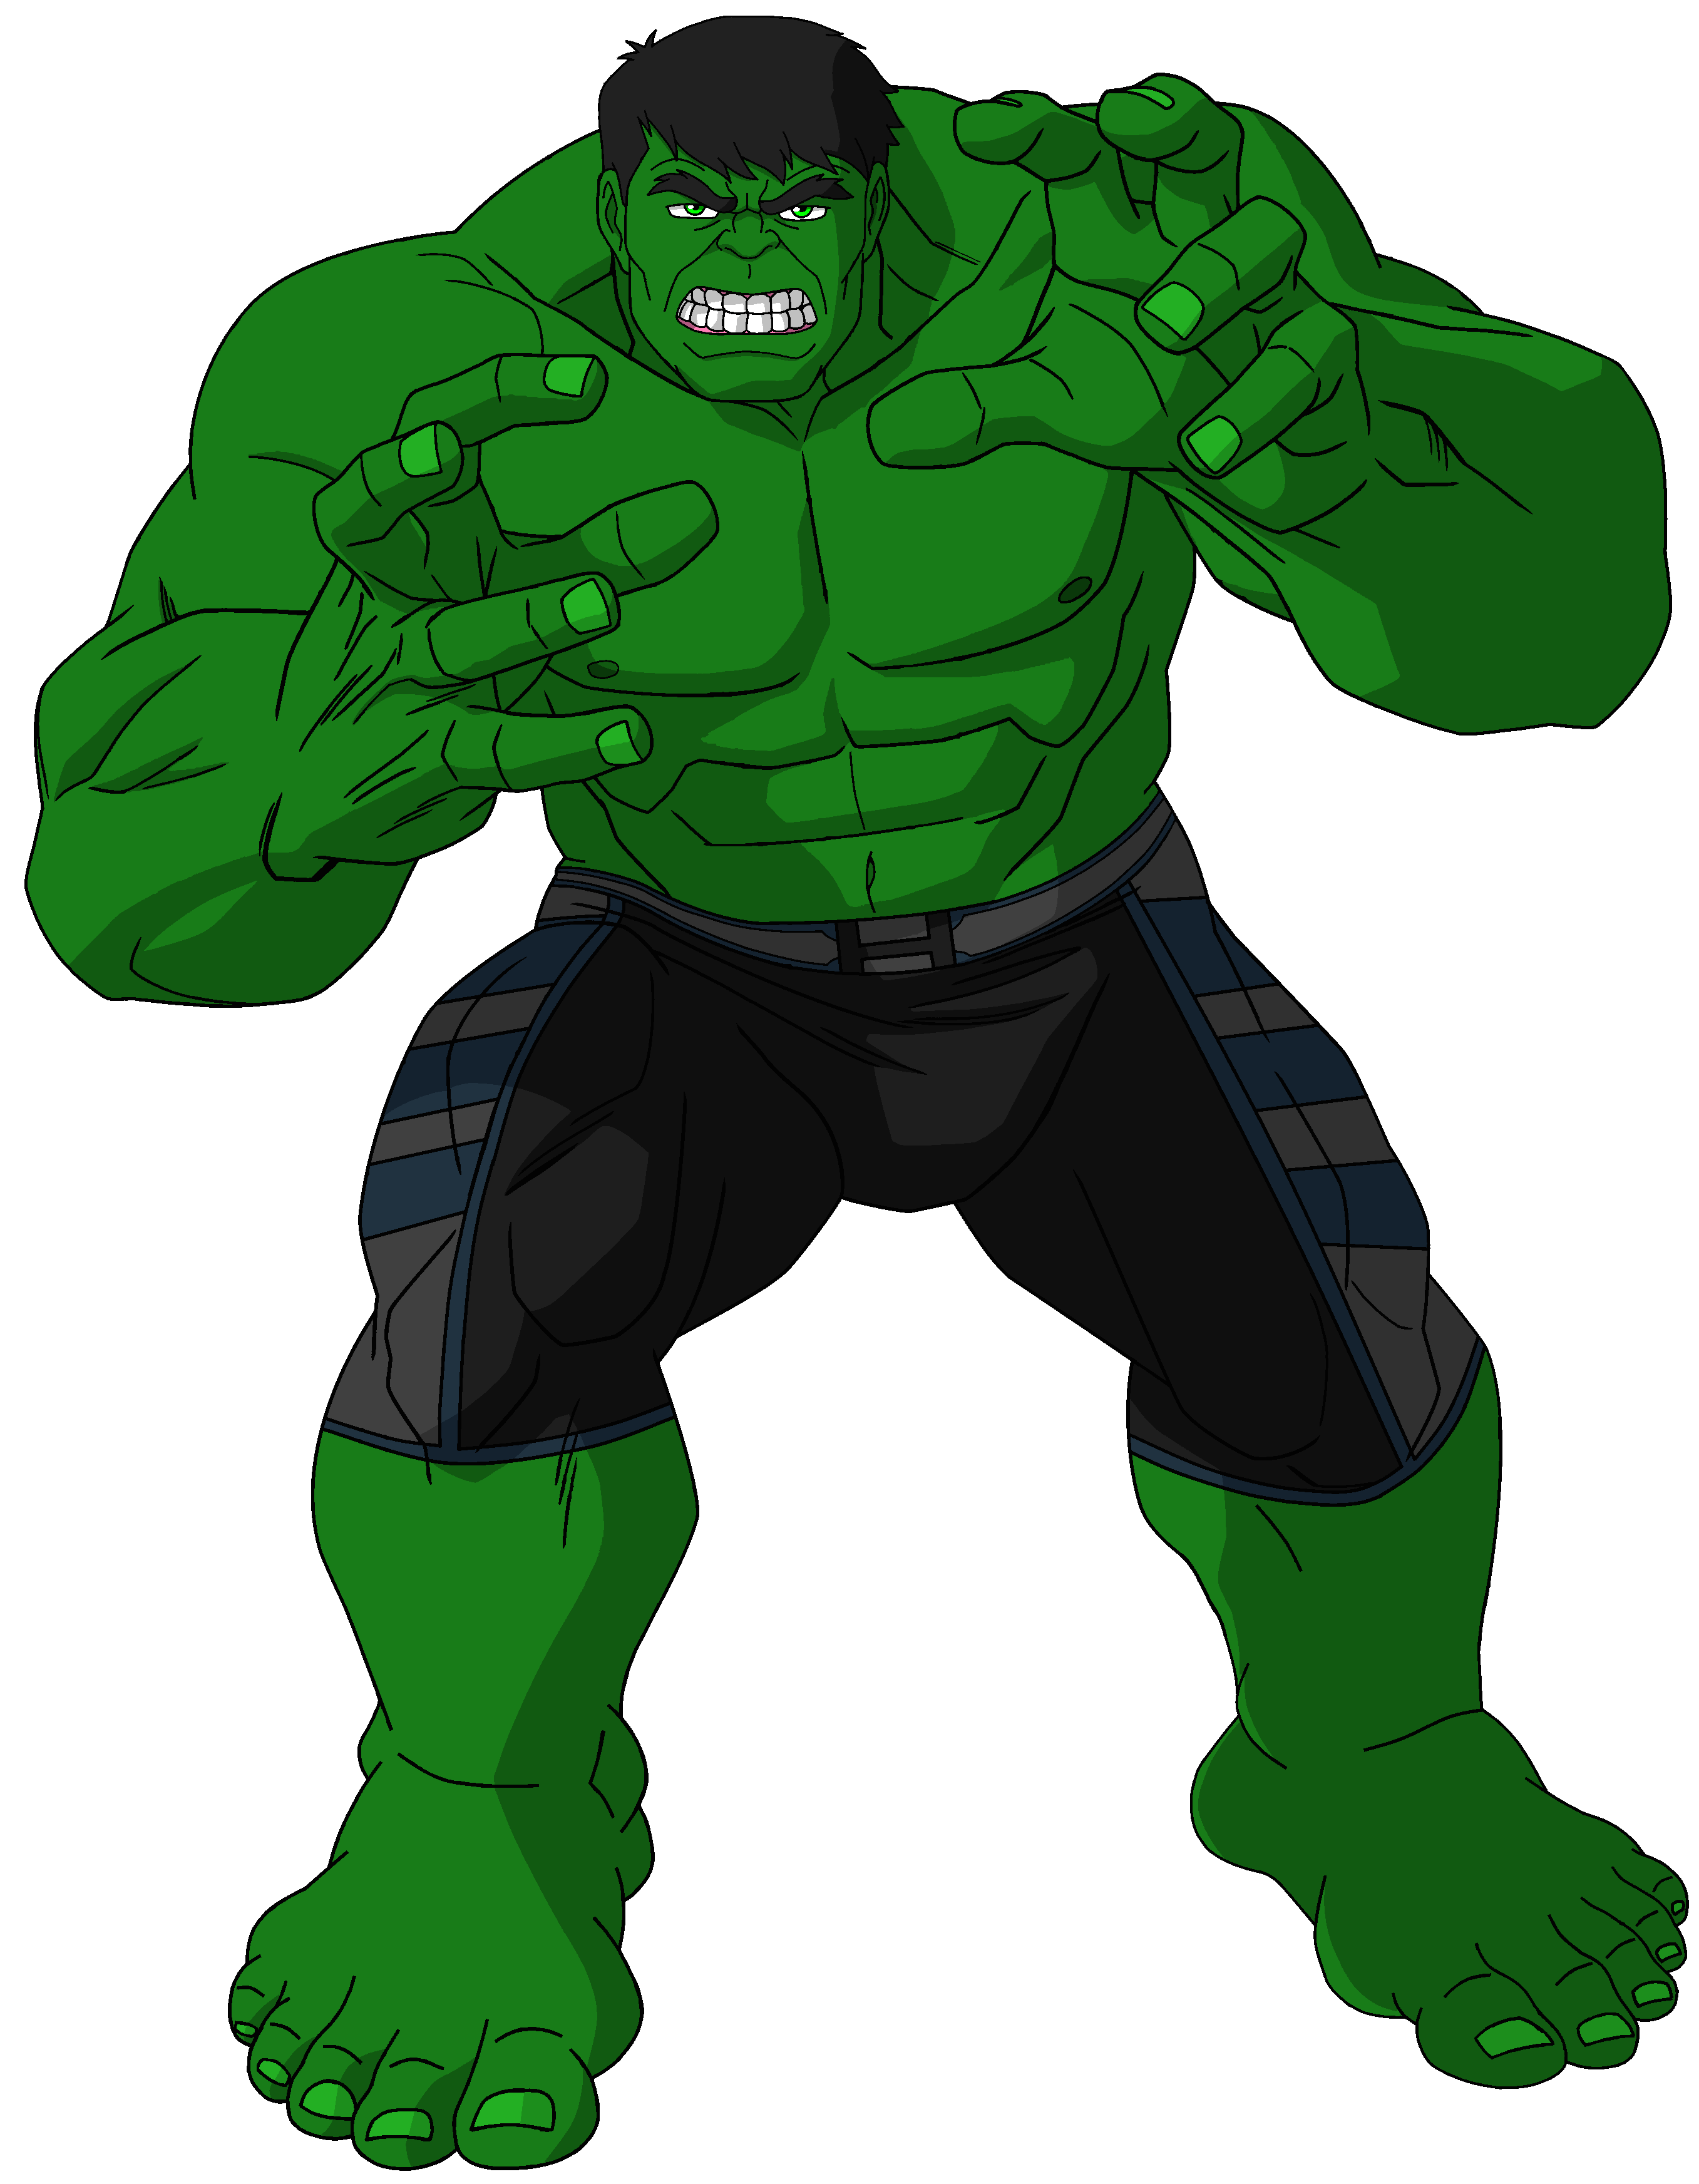 HULK the defender of the earth by steeven7620 on DeviantArt